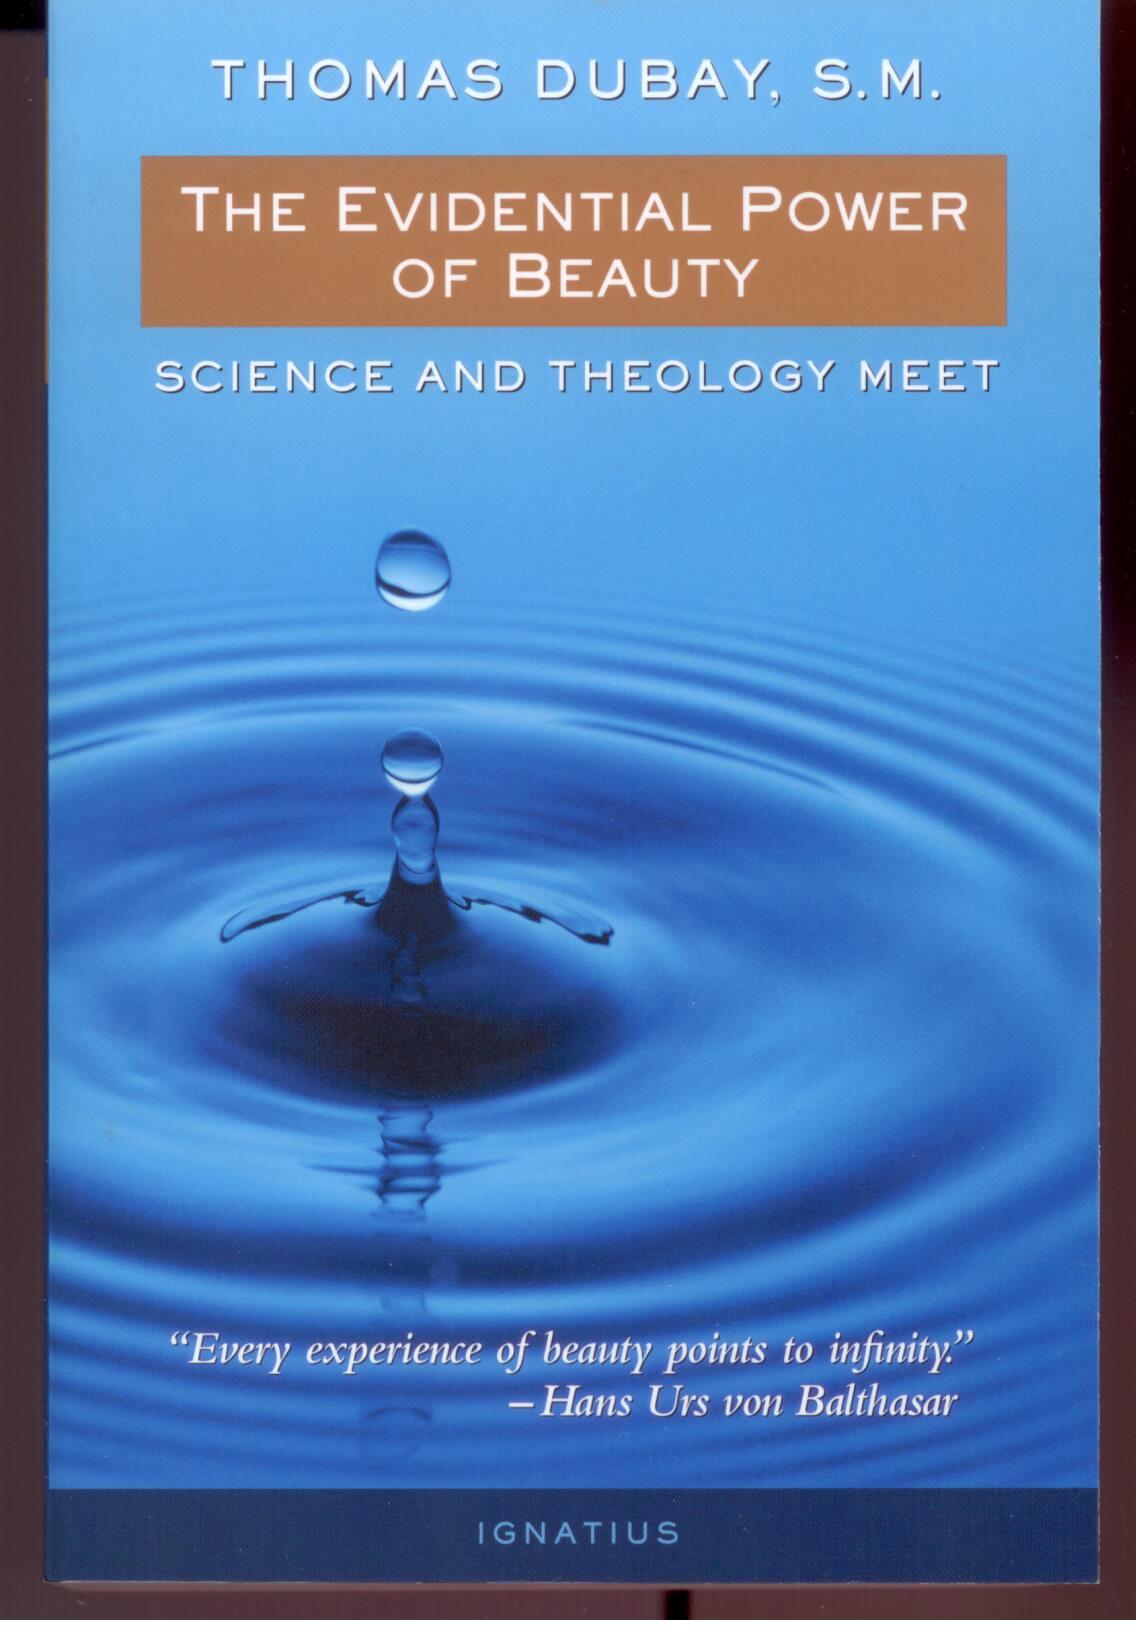 The Evidential Power Of Beauty by Thomas Dubay, S.M.